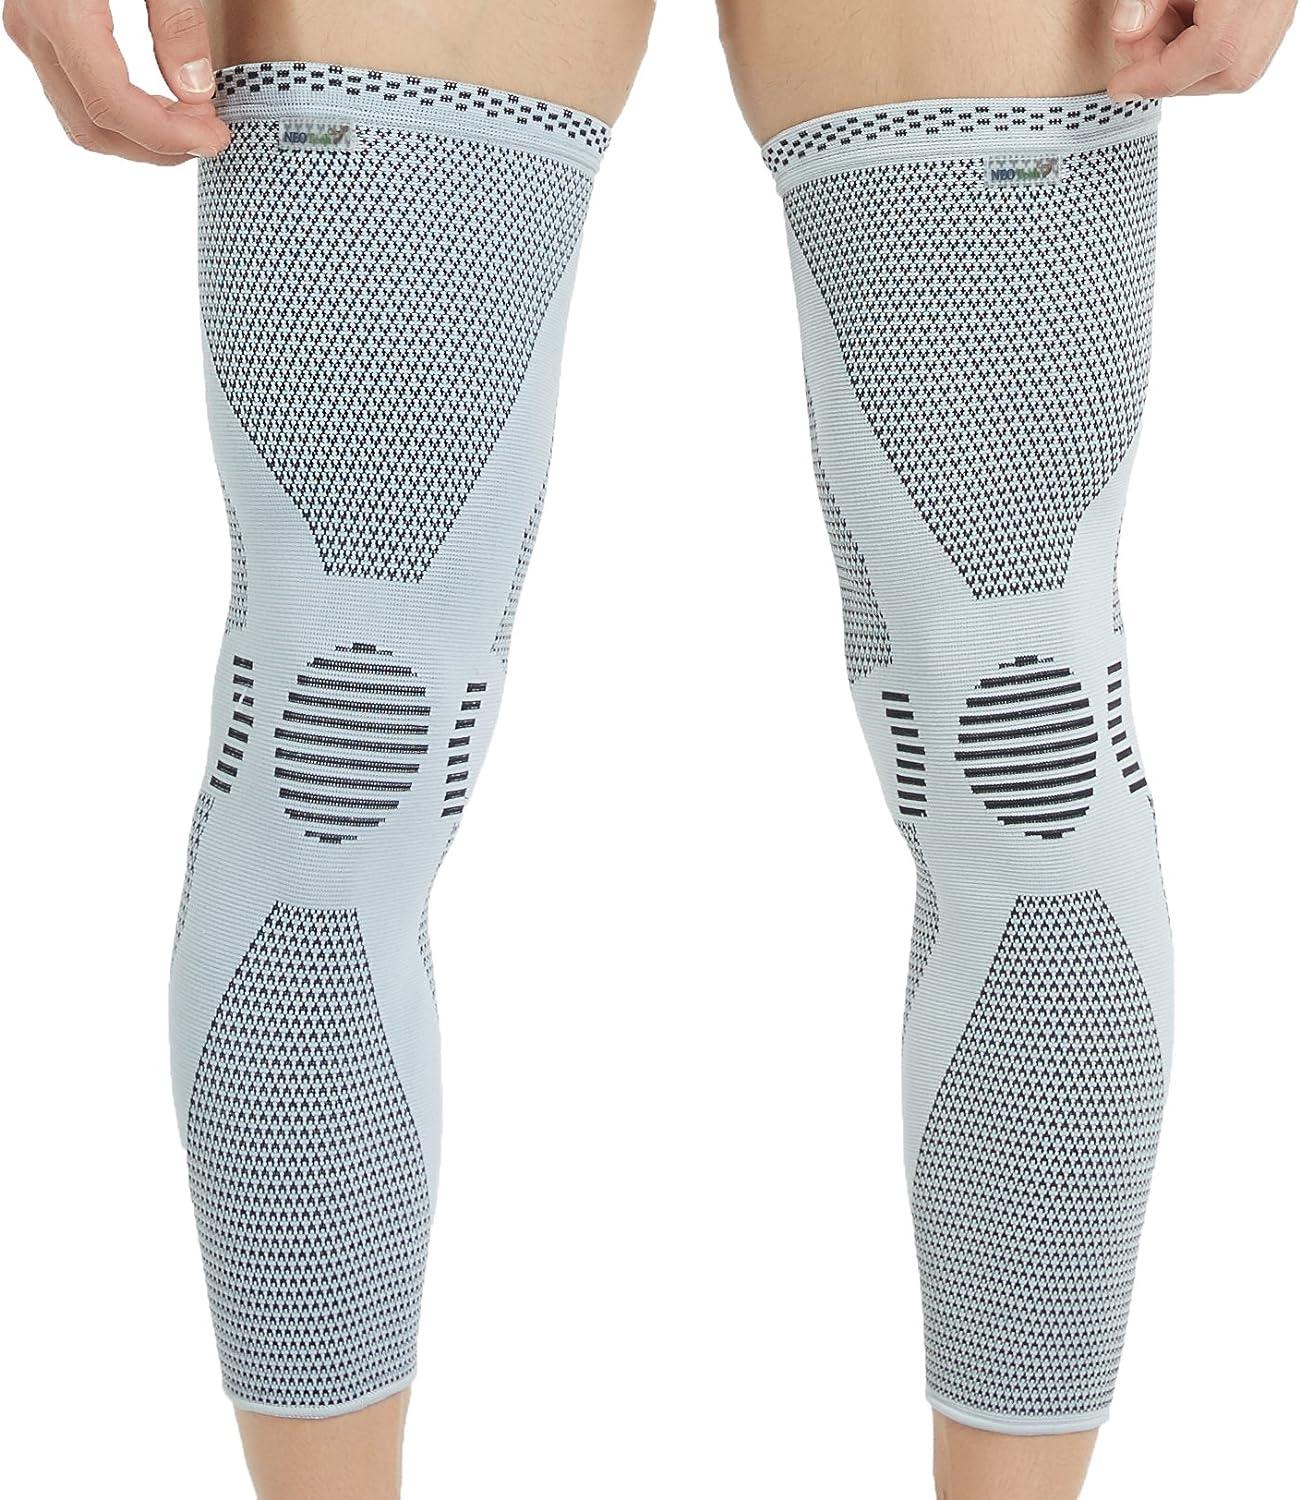 NeoTech Care Leg and Knee Support Sleeve - Bamboo Fiber Knitted Fabric -  Elastic & Breathable - Medium Compression - Grey Color - Size S M L or XL  X-Large (Pack of 1) 1